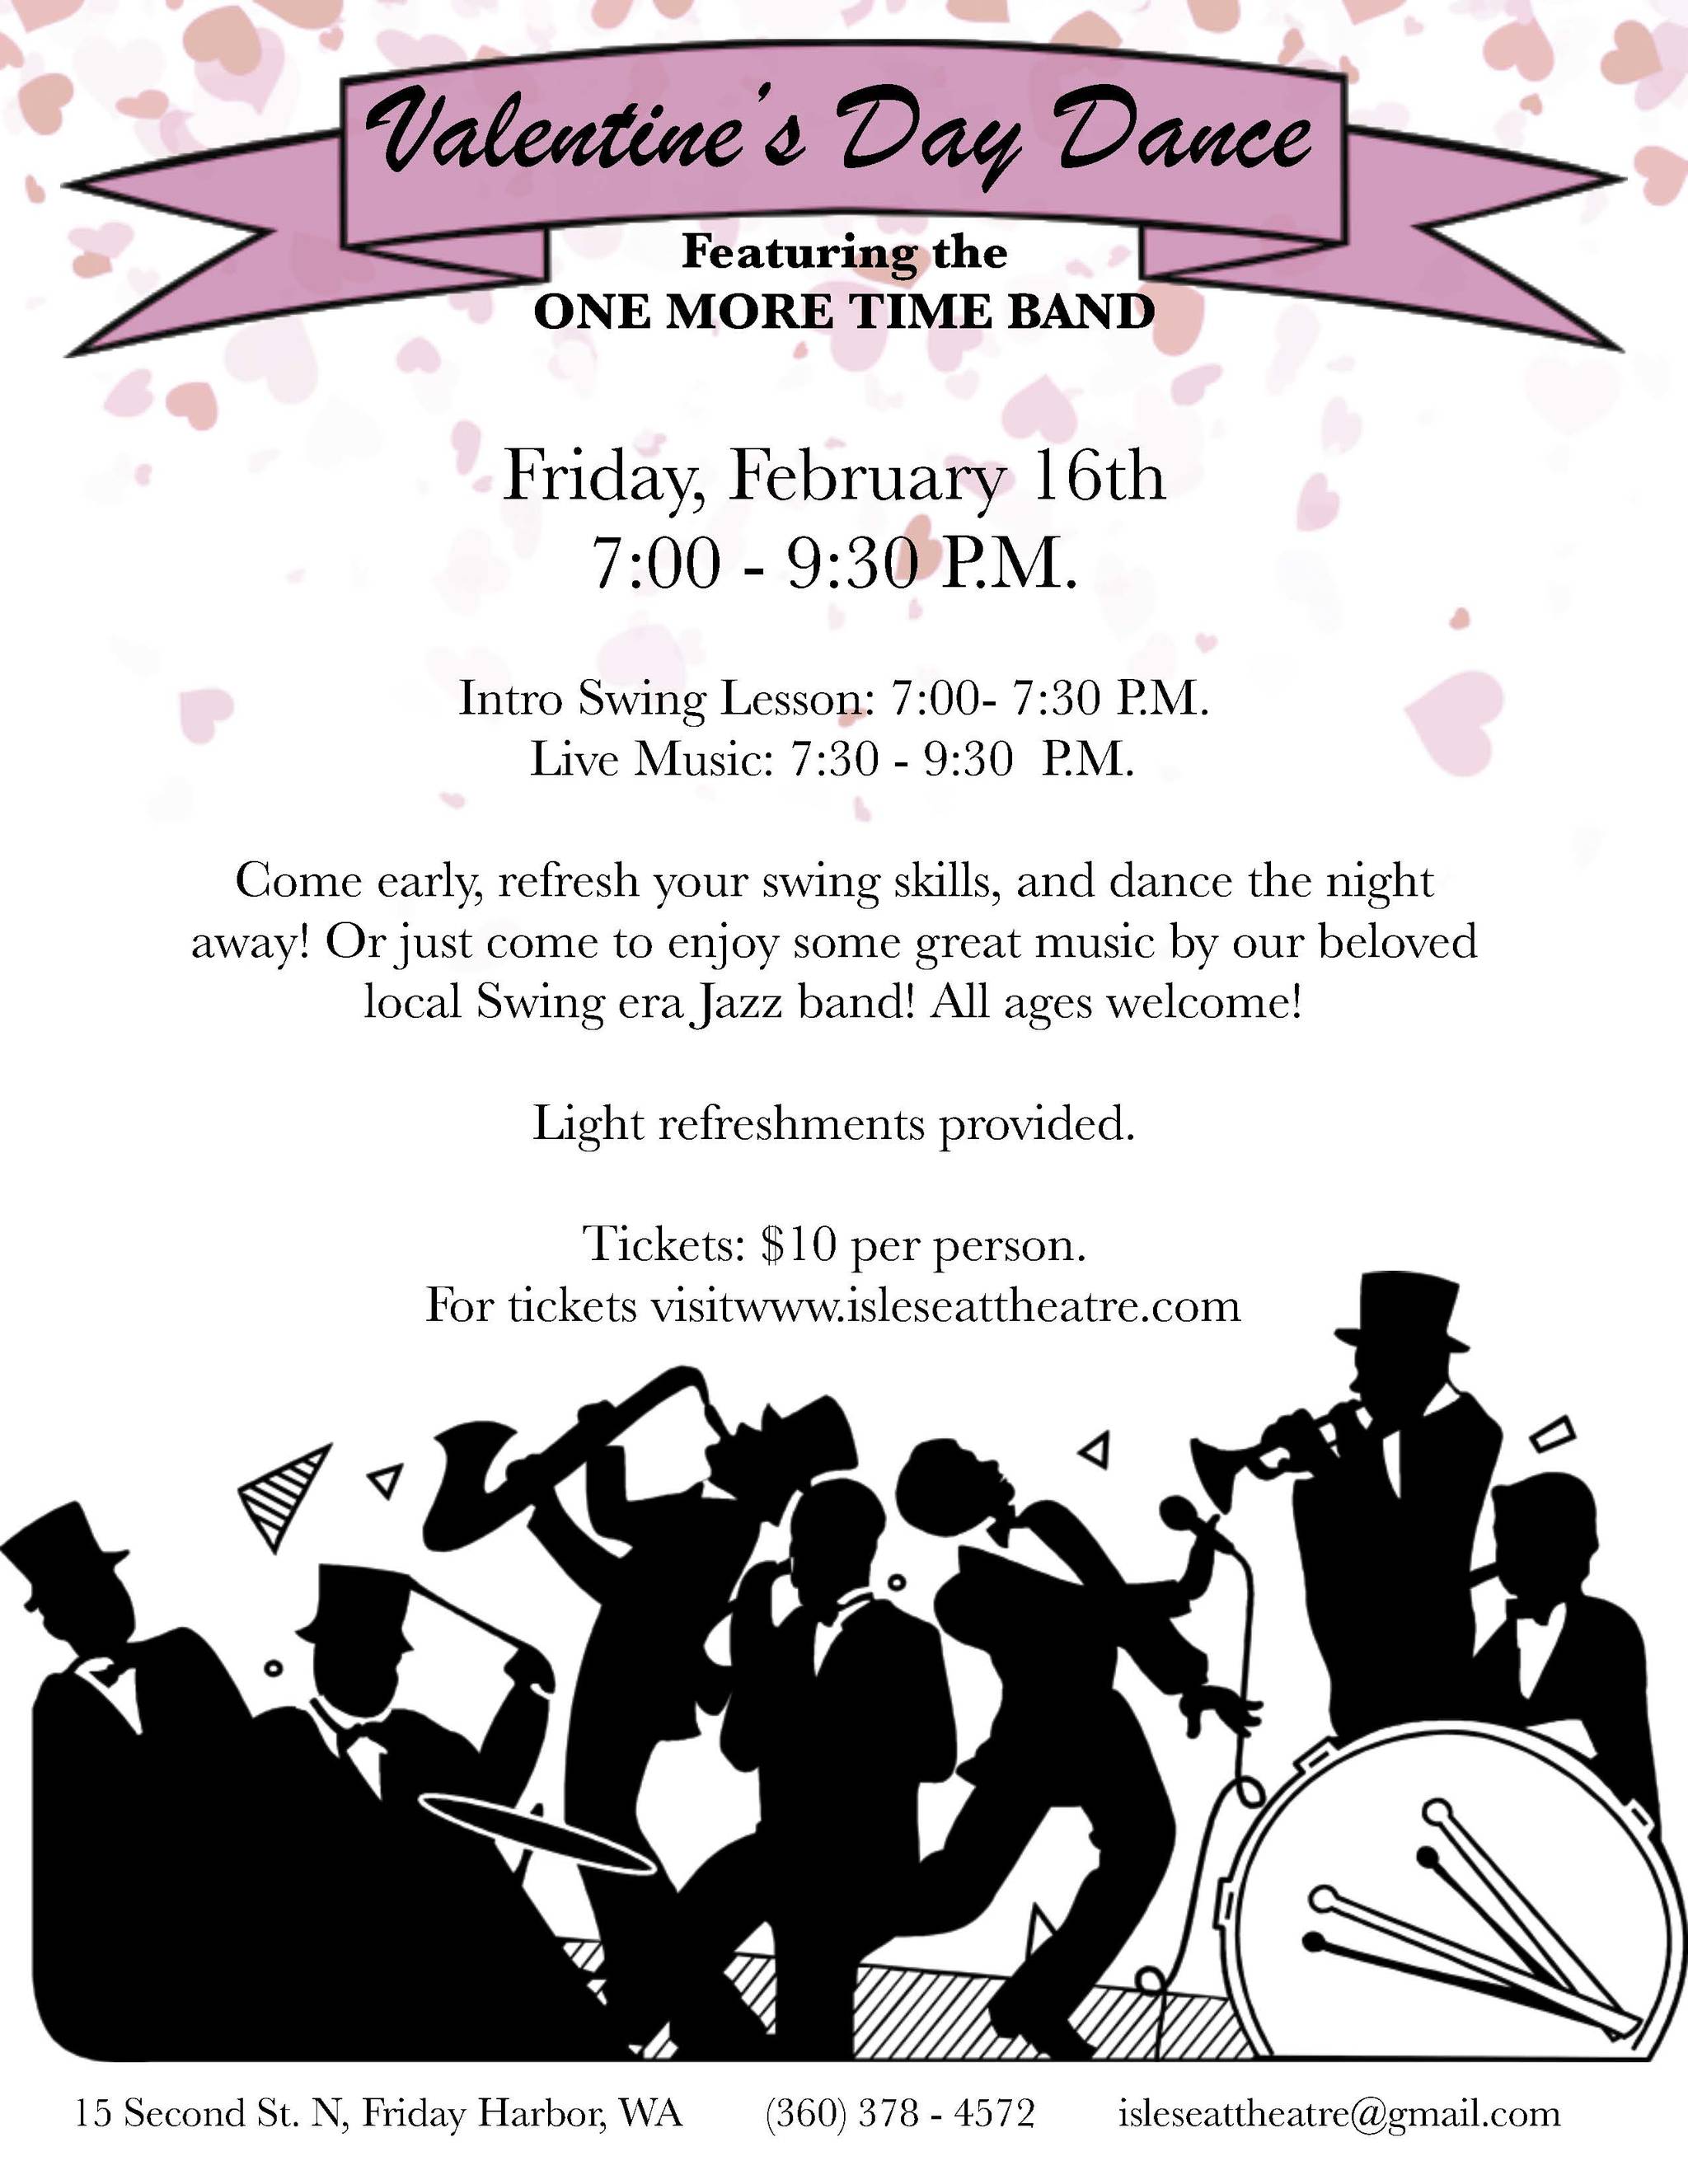 Join Isle Theatre for Valentine’s Day dance